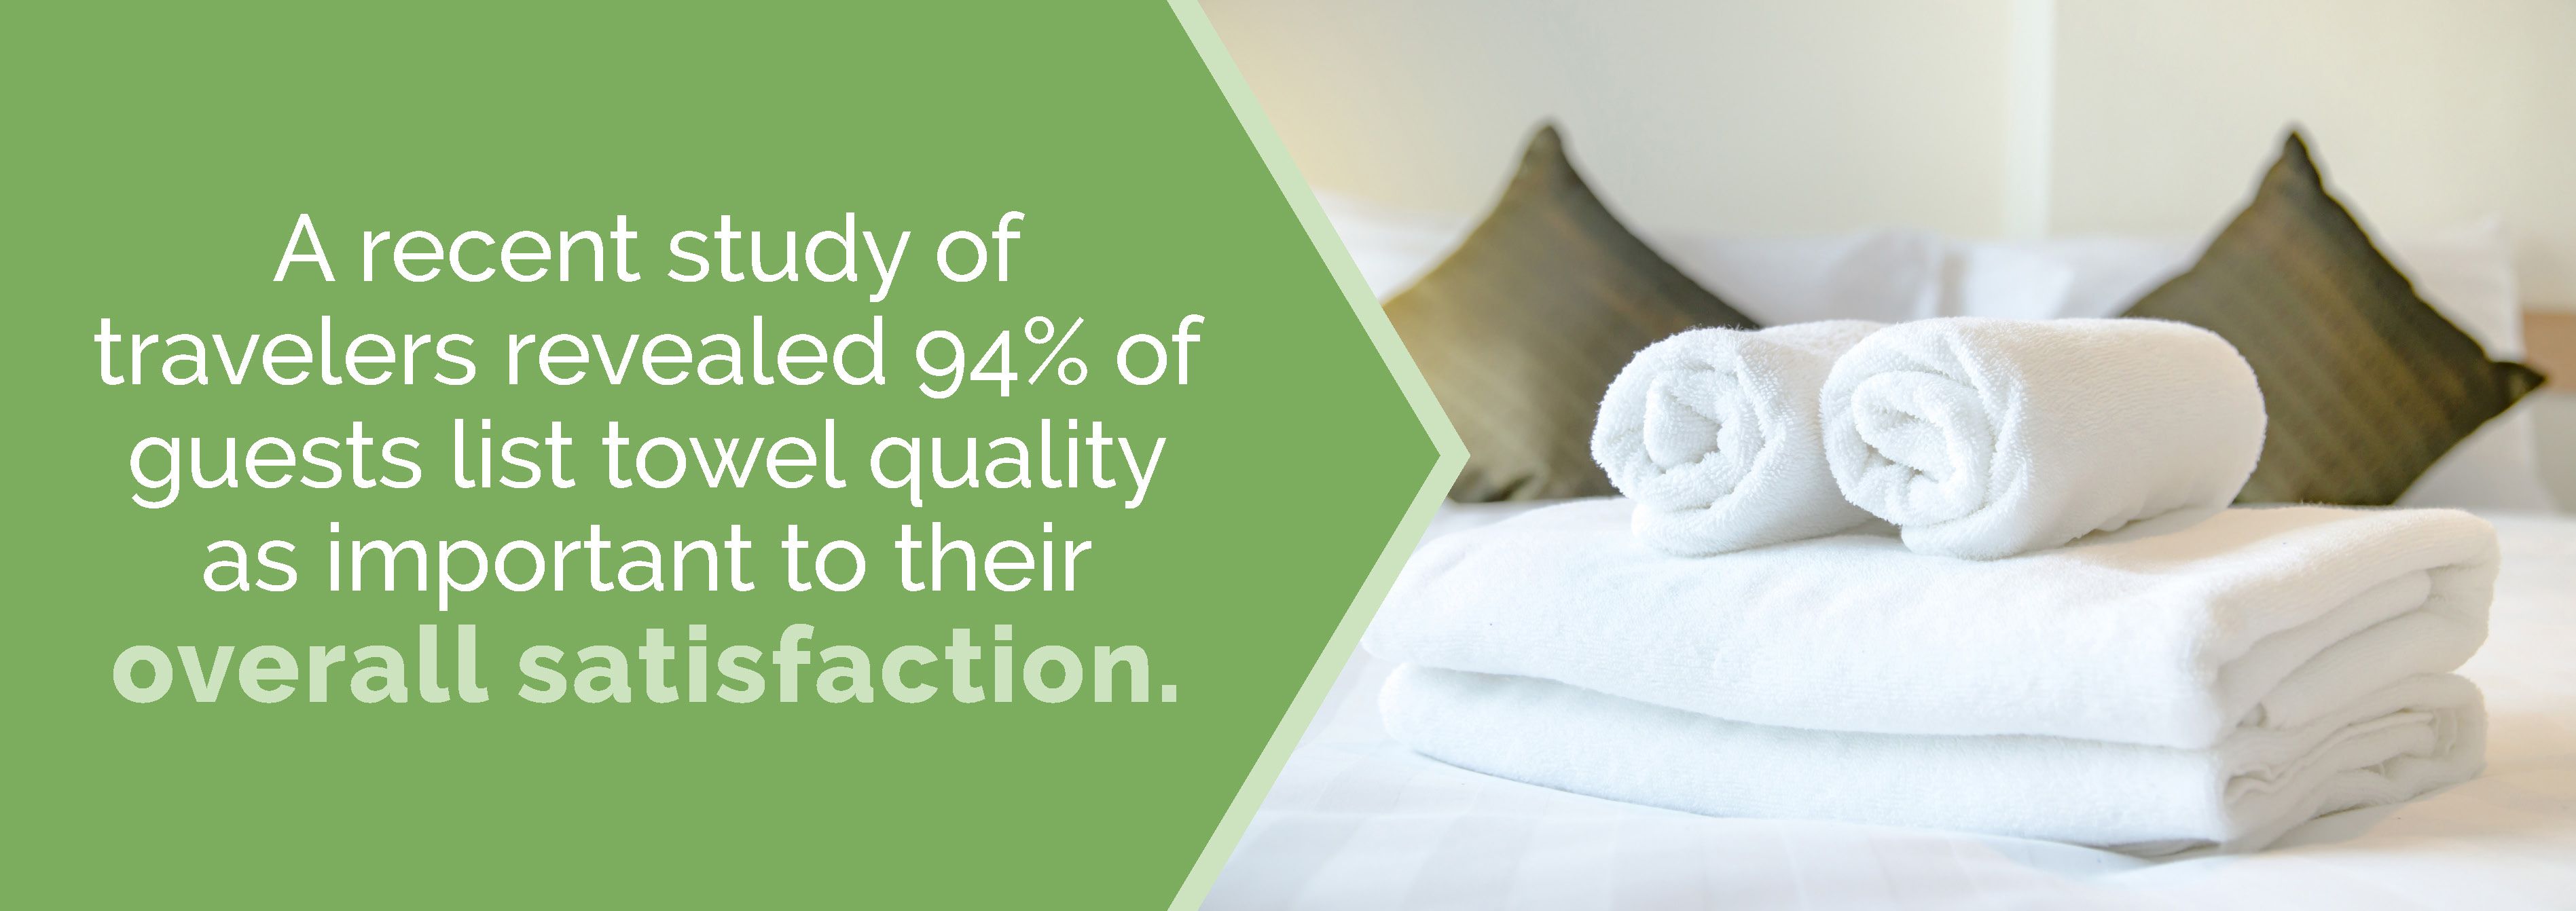 Guests list towel quality as important to their overall satisfaction.